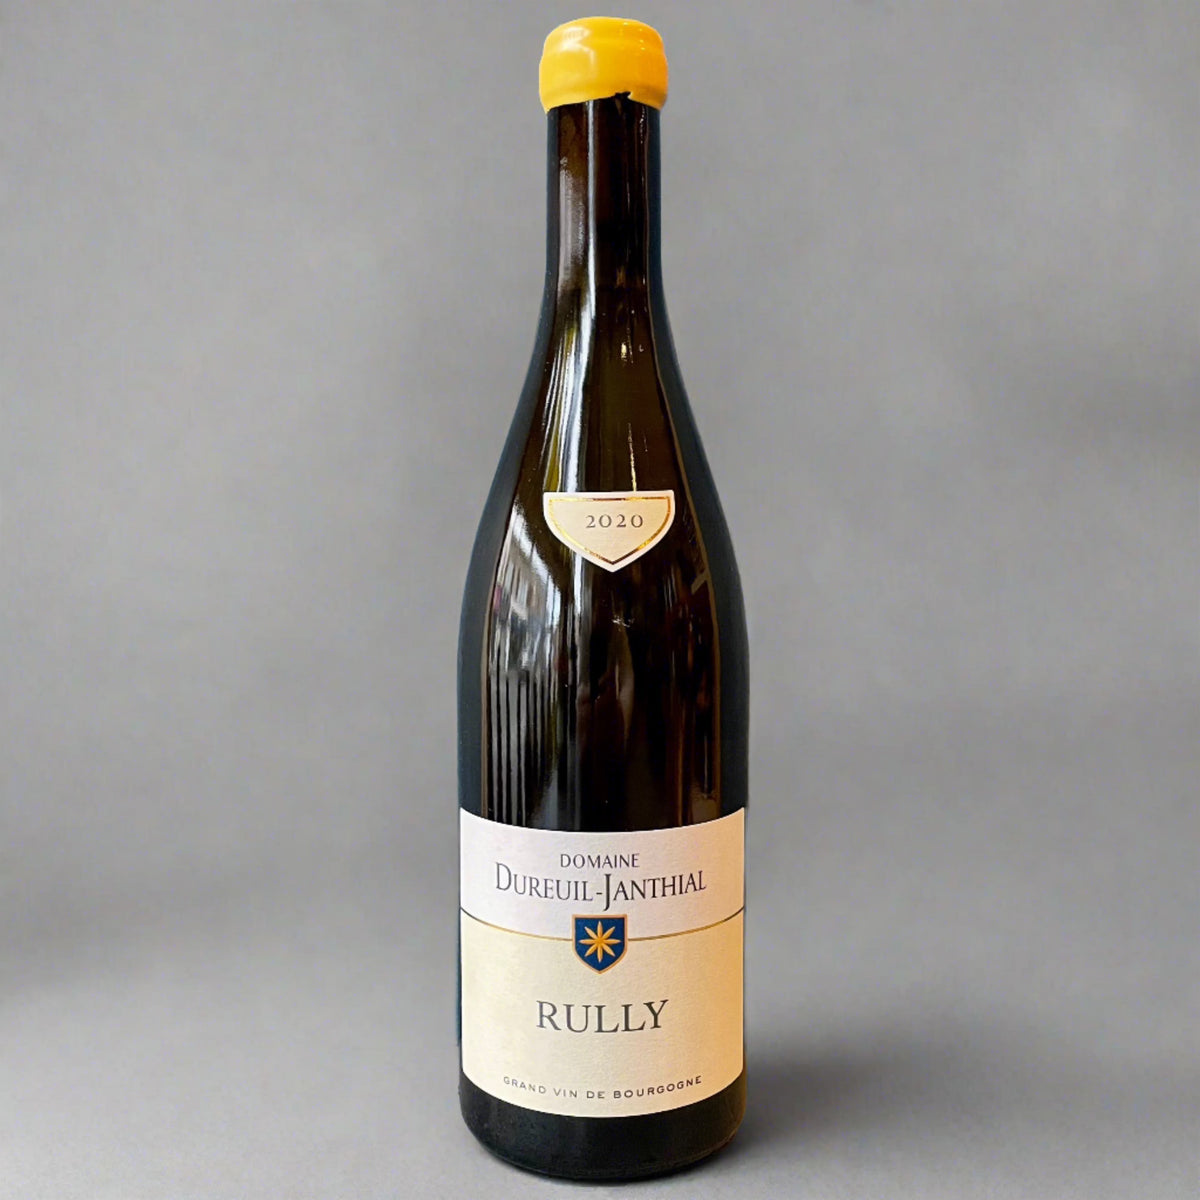 Domaine Dureuil-Janthial, Rully Blanc